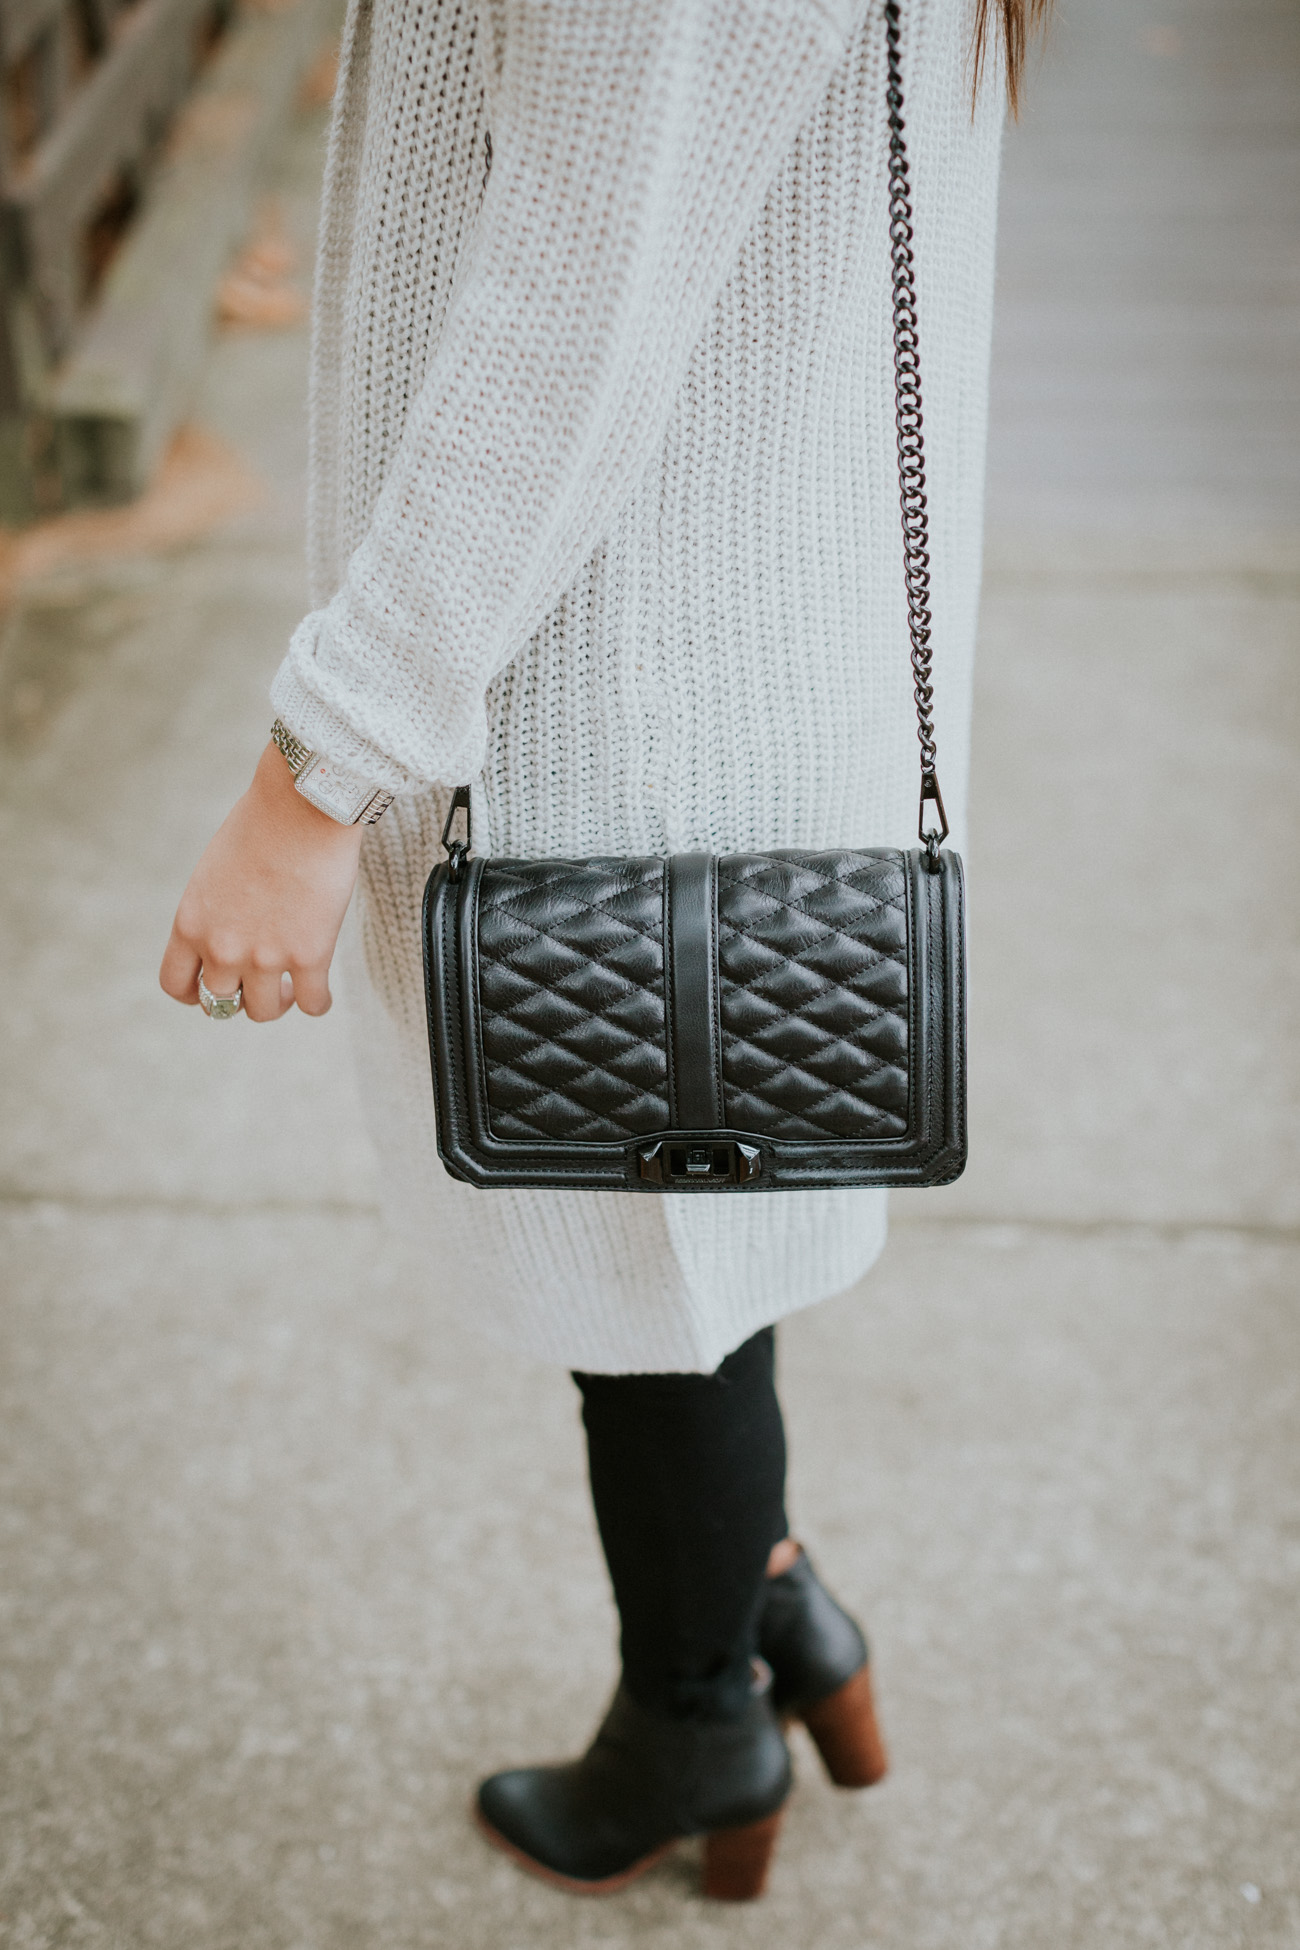 long gray cardigan, black quilted bag, black quilted crossbody bag, black distressed skinny jeans, choker necklace, halogen black booties, fall style, fall outfit, fall fashion, nordstrom fall accessories, nordstrom accessories, long cardigan, waterfall cardigan // grace wainwright a southern drawl